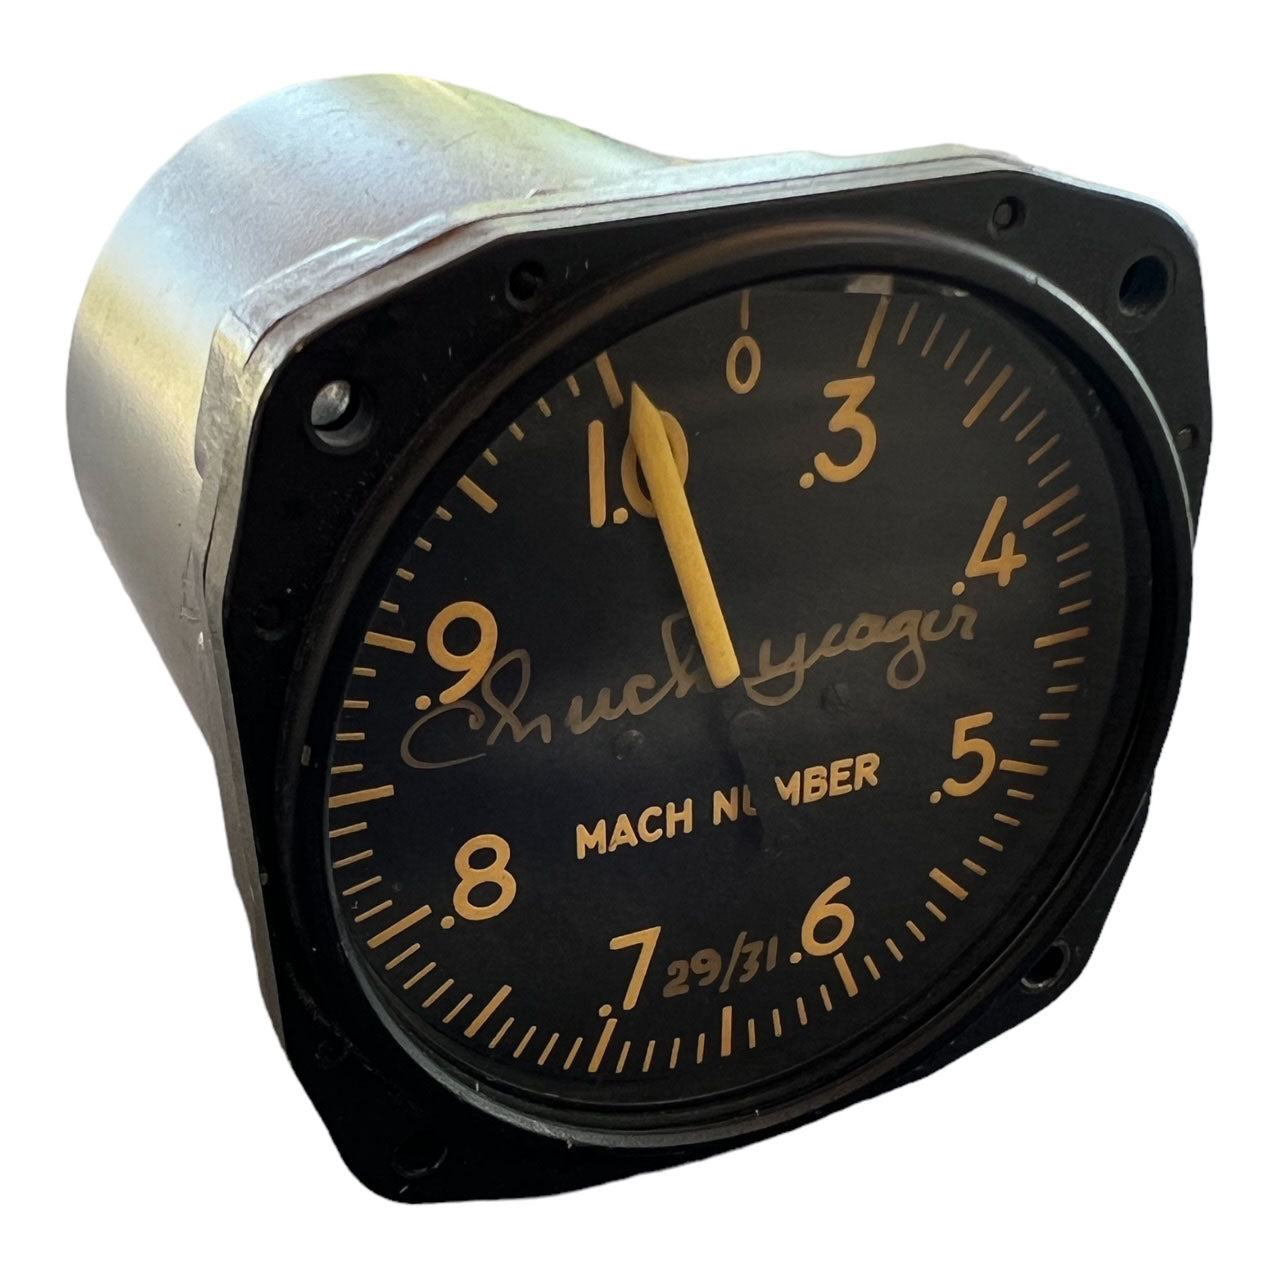 Chuck Yeager – signed replica Machmeter with flown dial